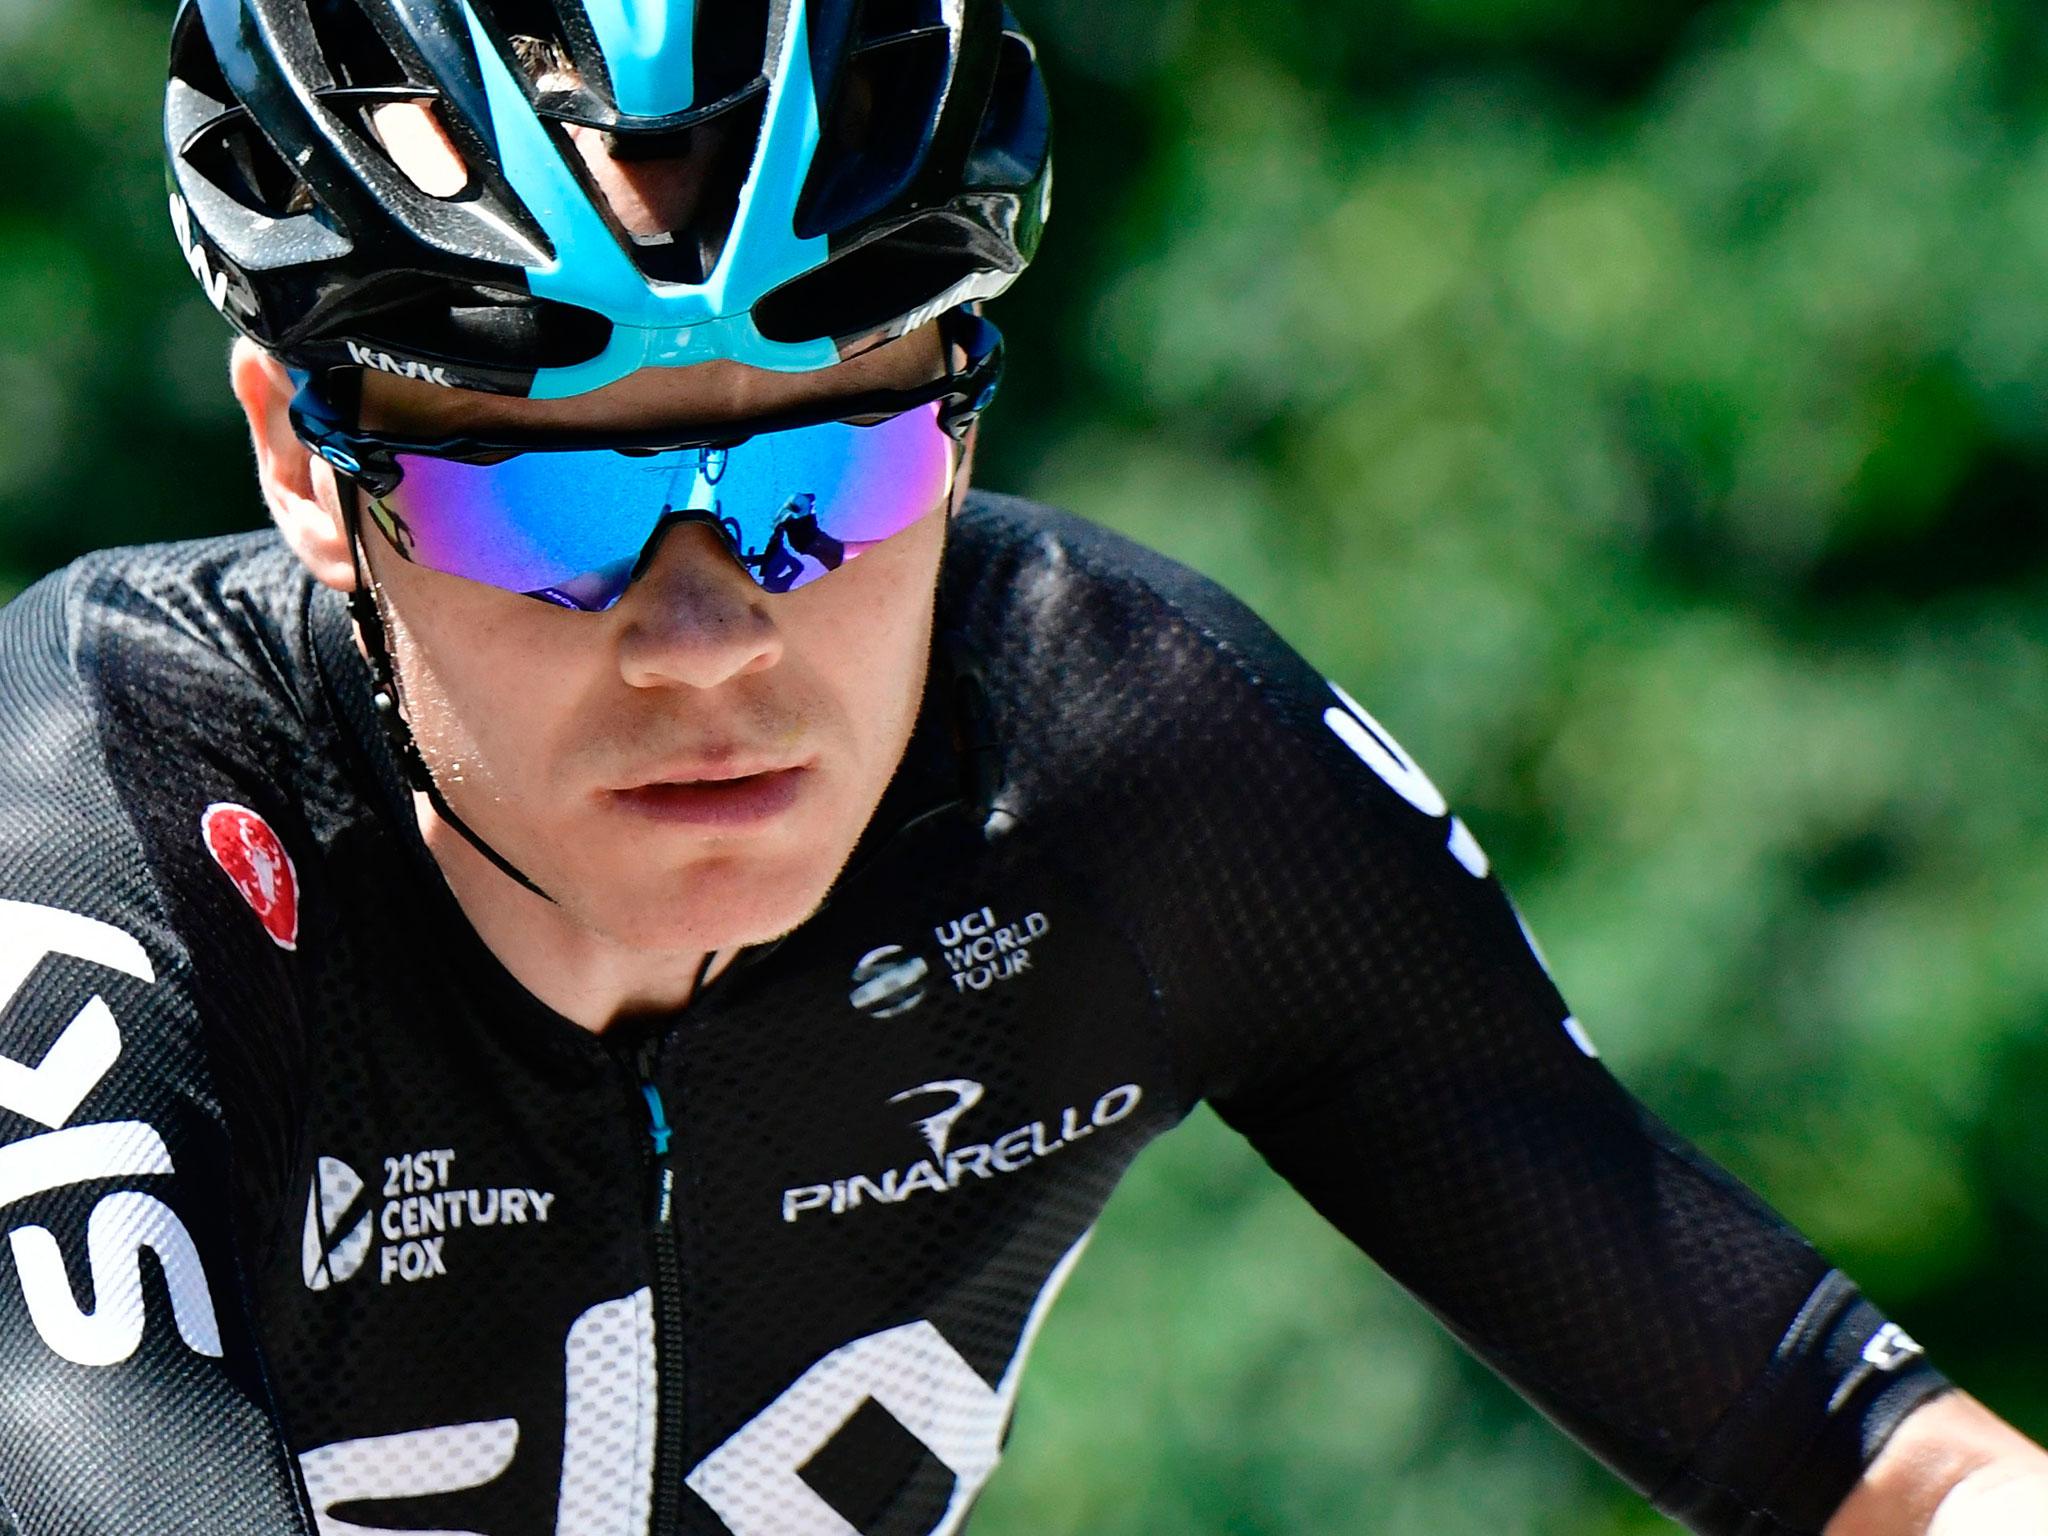 &#13;
Froome is eyeing a historic fourth Tour de France title?&#13;